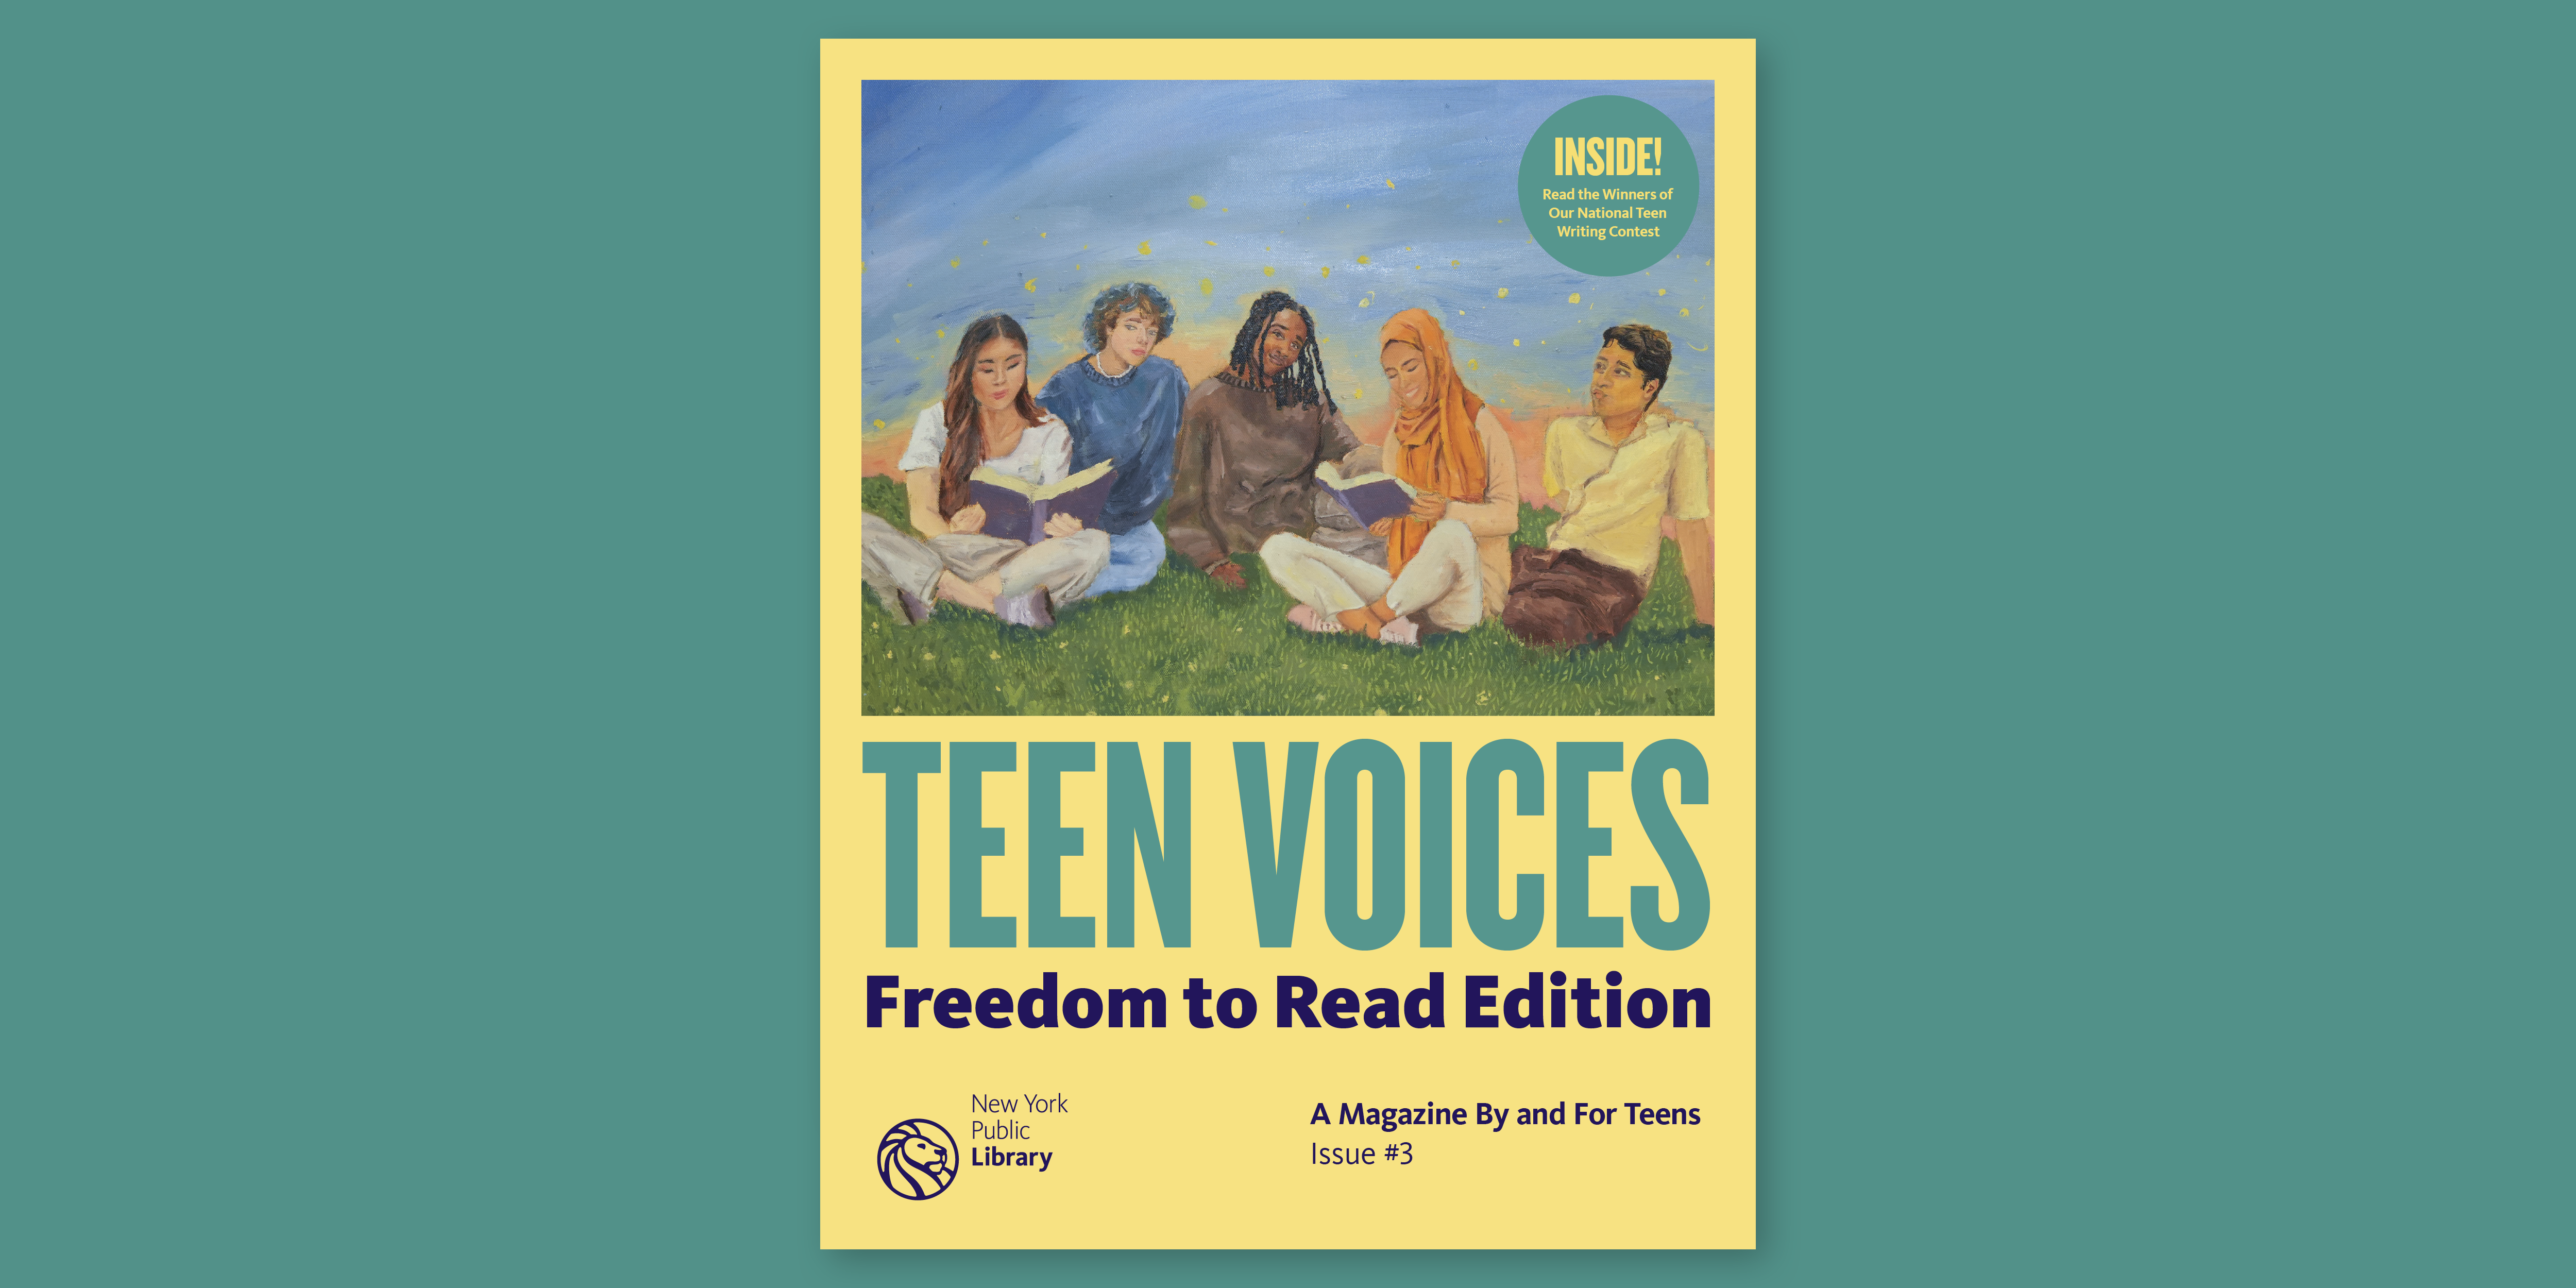 Magazine cover: Teen Voices, Freedom to Read Issue. A magazine by and for teens